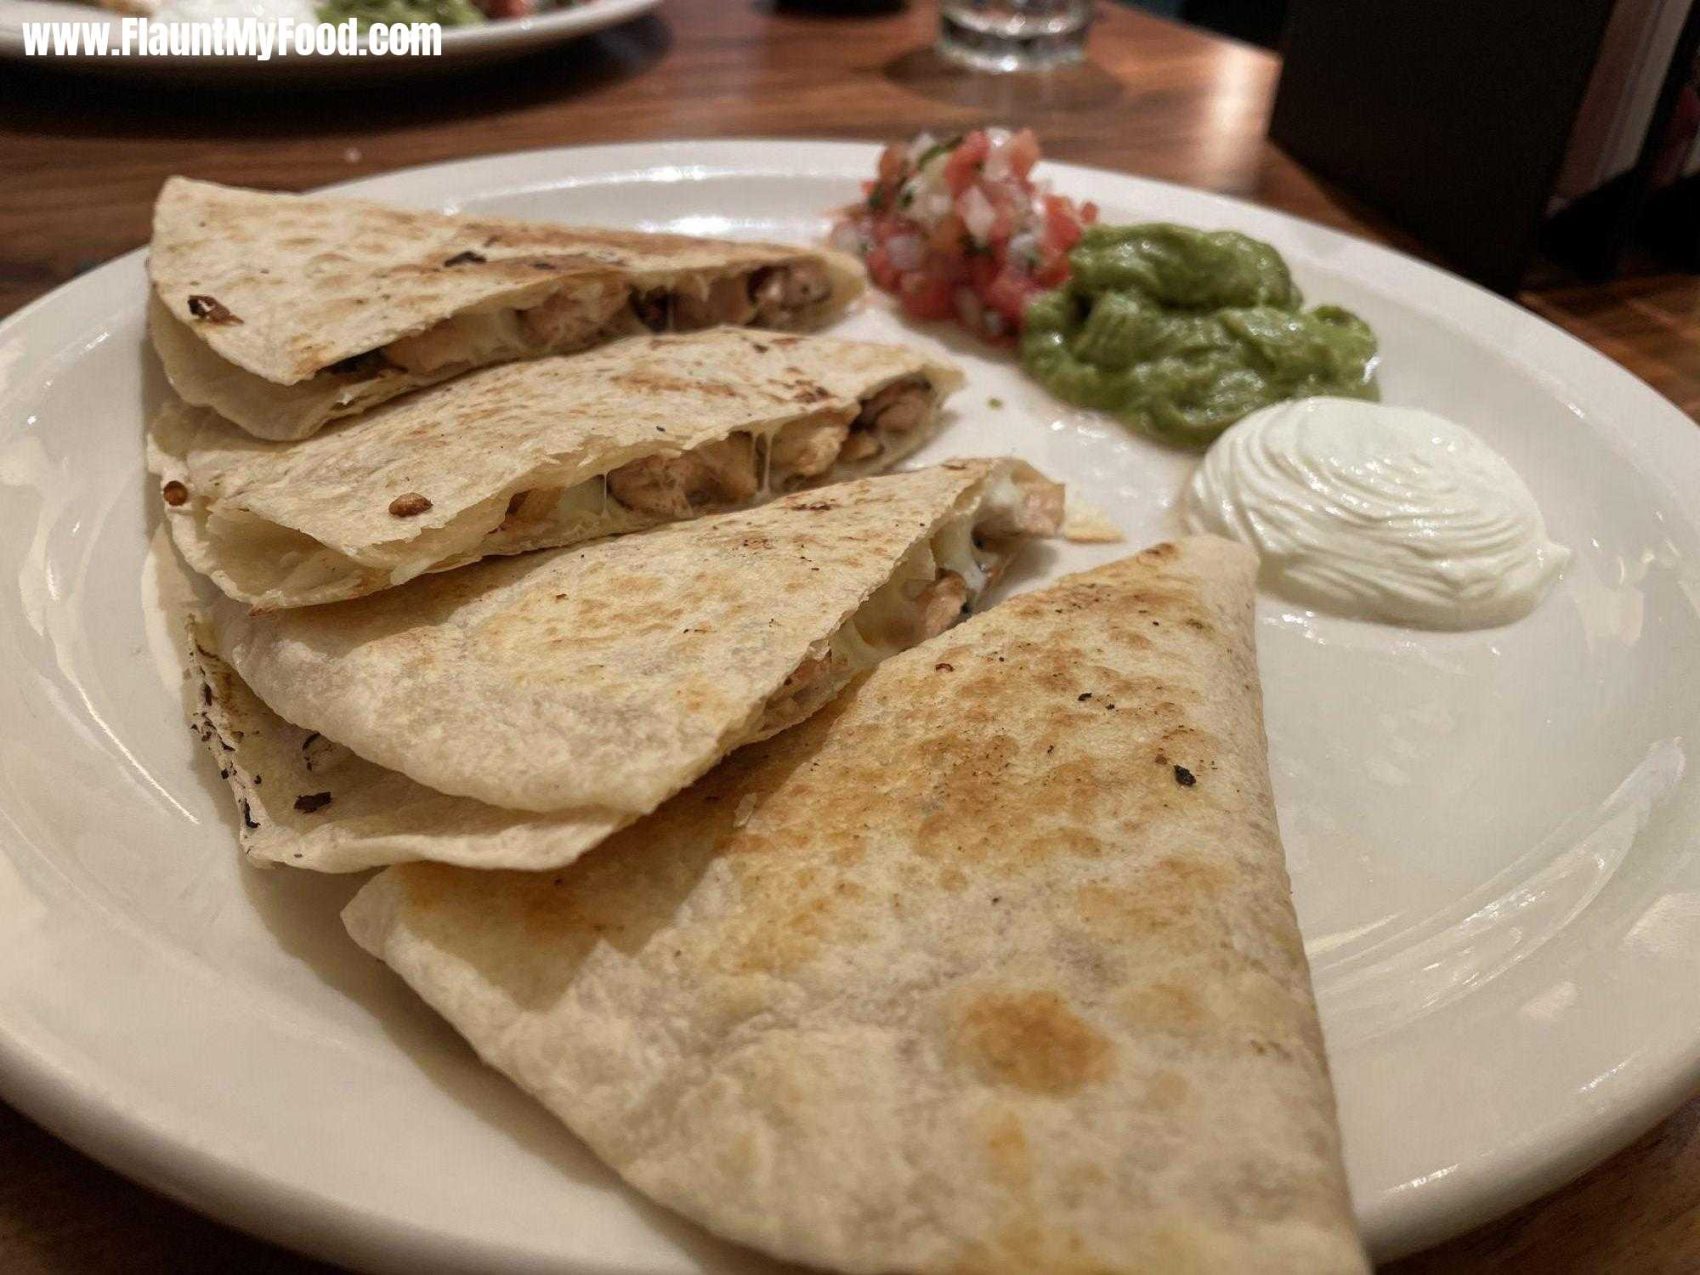 Chicken quesadillas Pacos Mexican Cuisine on Magnolia near downtown Fort Worth TexasChicken quesadillas Pacos Mexican Cuisine on Magnolia near downtown Fort Worth Texas